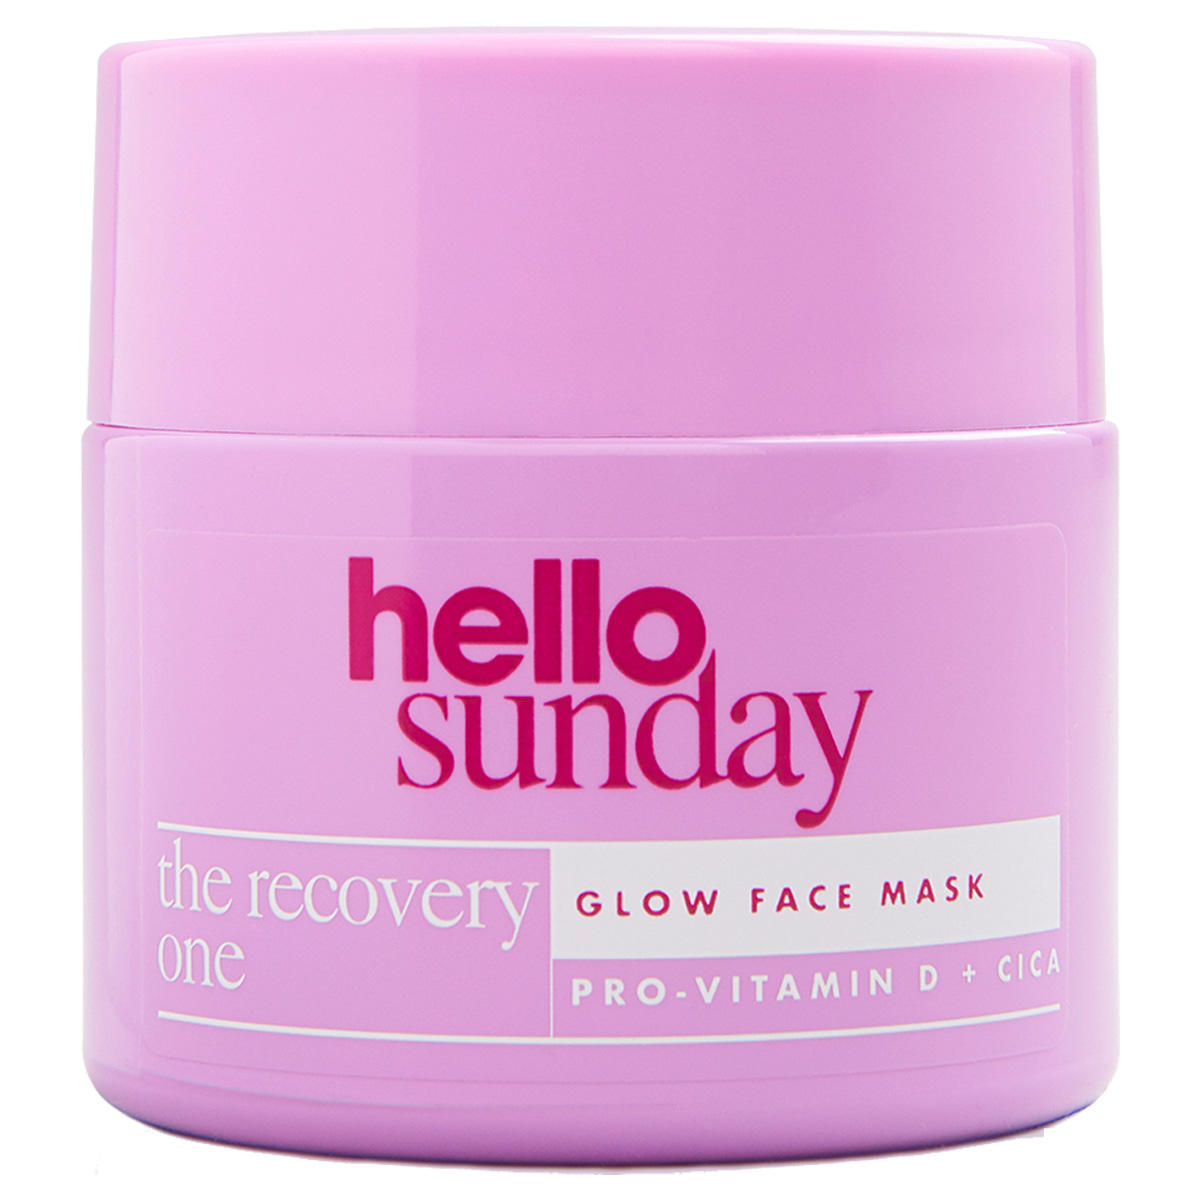 hello sunday the recovery one glow face mask 50 ml